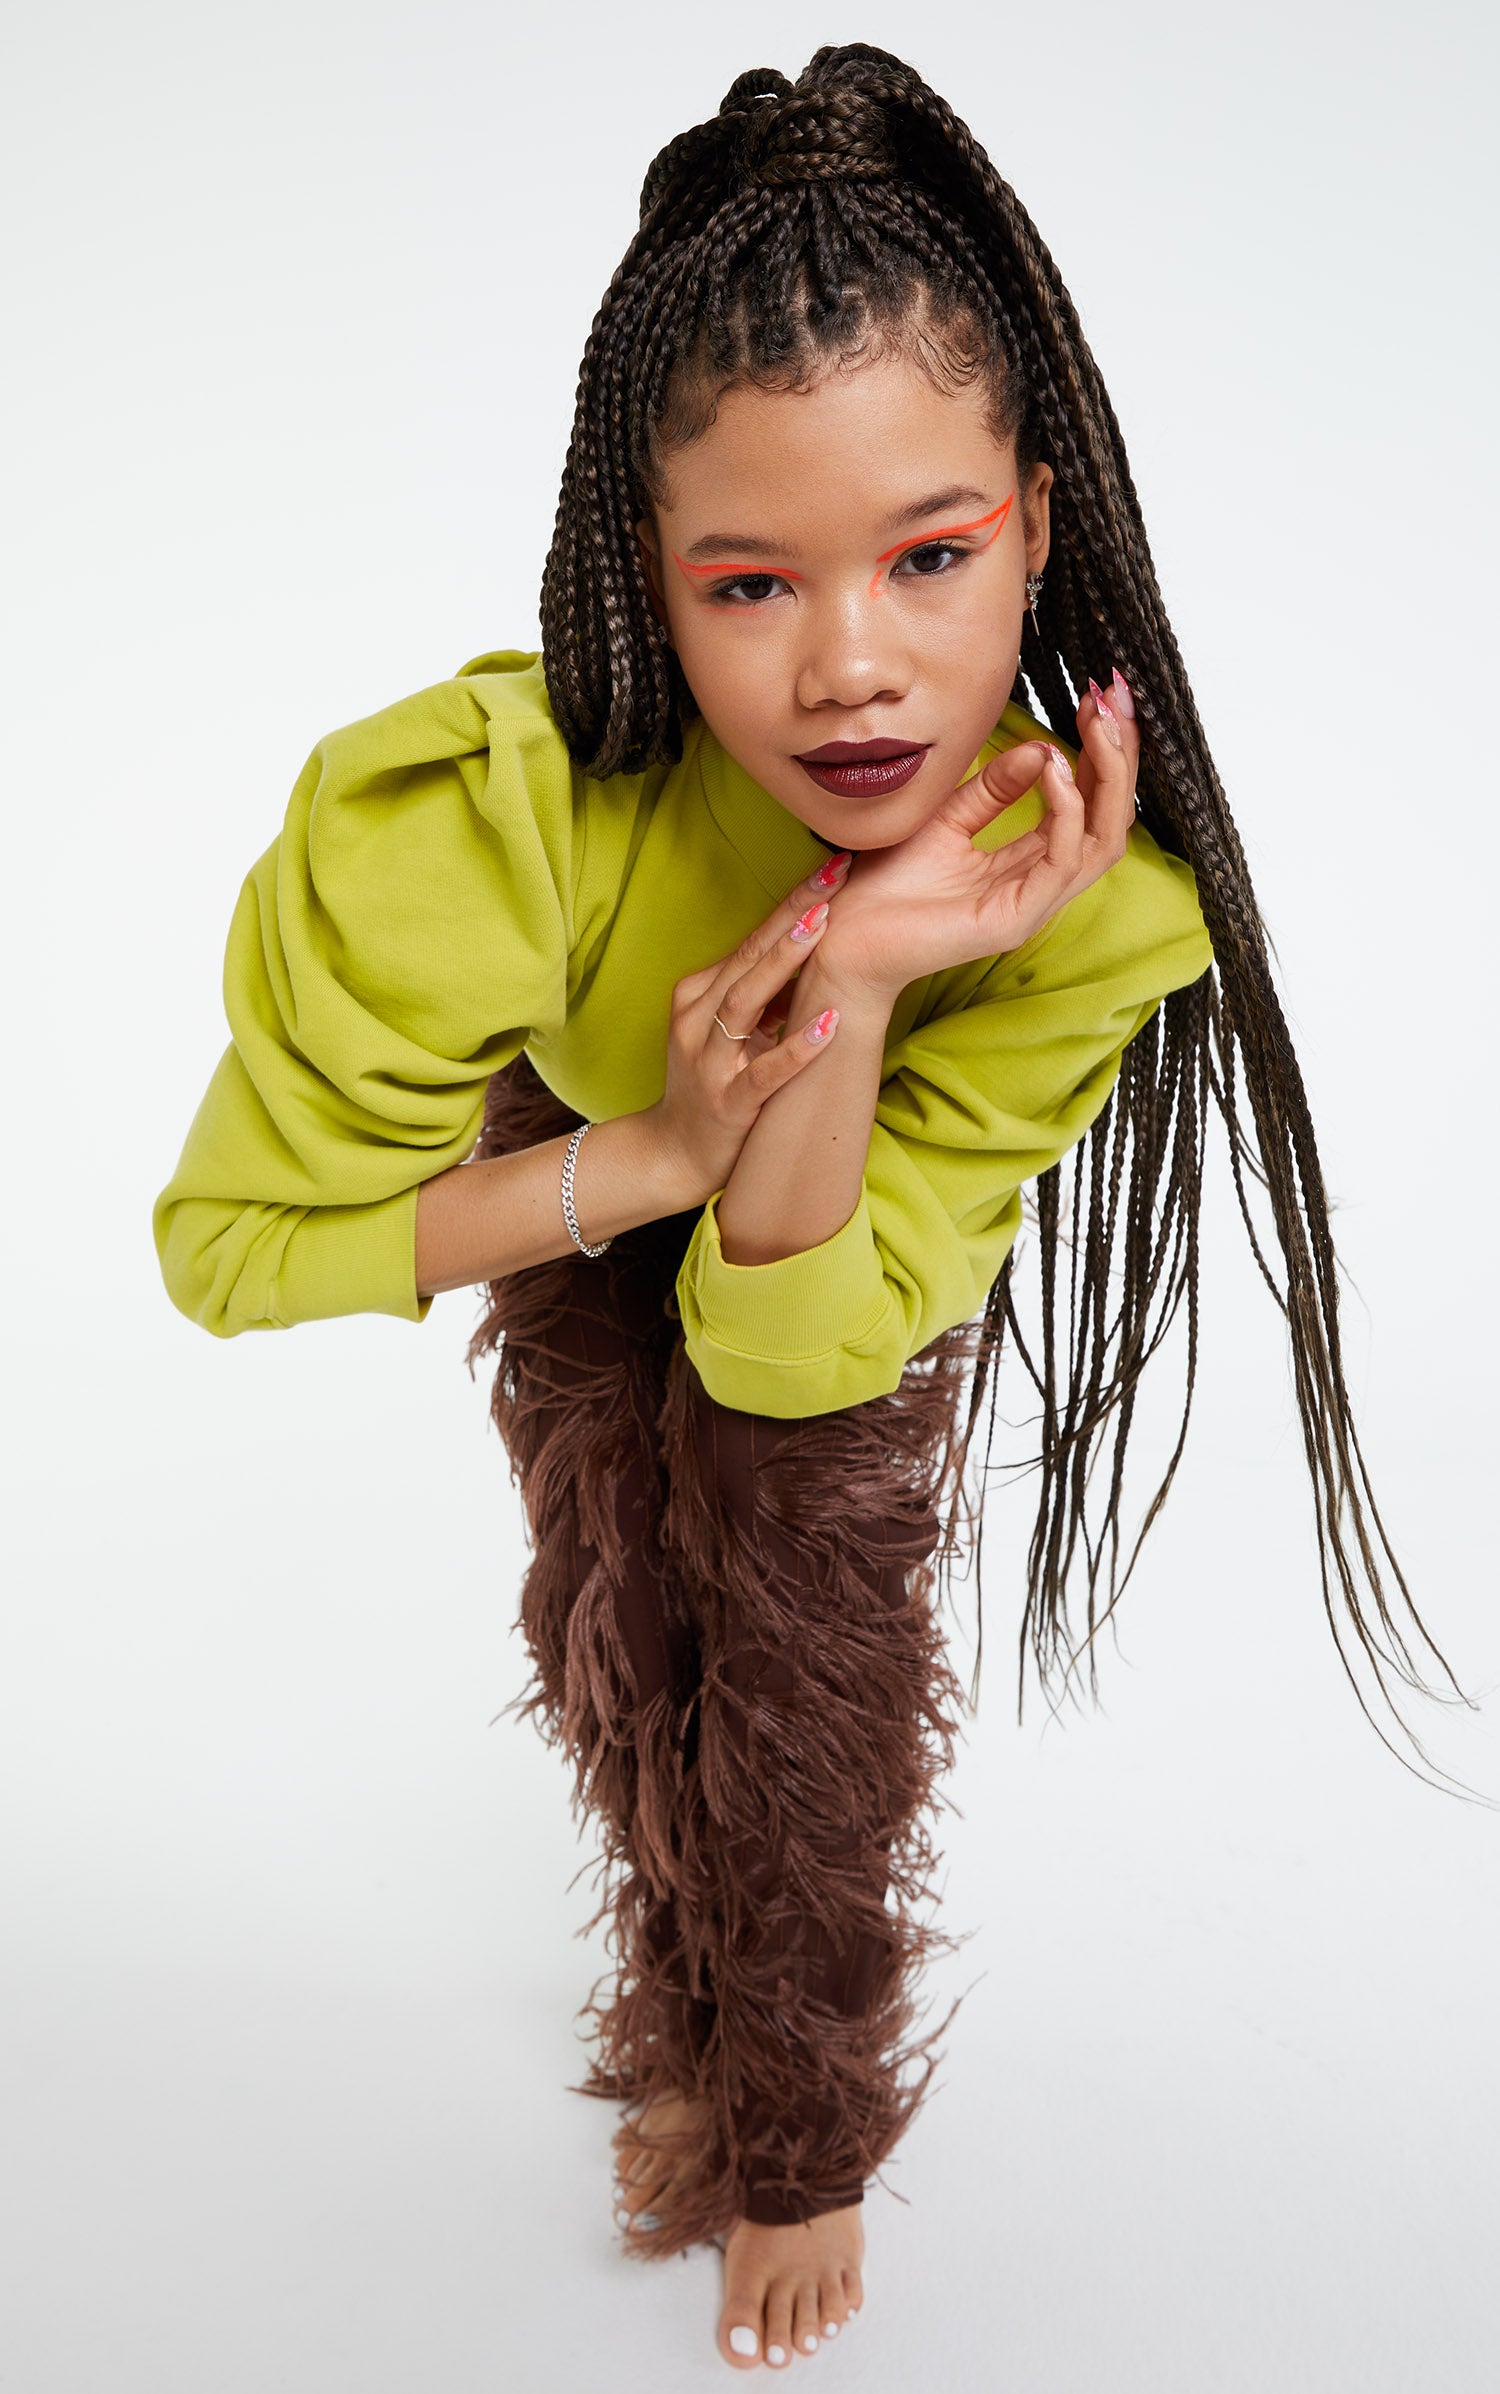 Actress Storm Reid Is The Newest Face Of  Maybelline